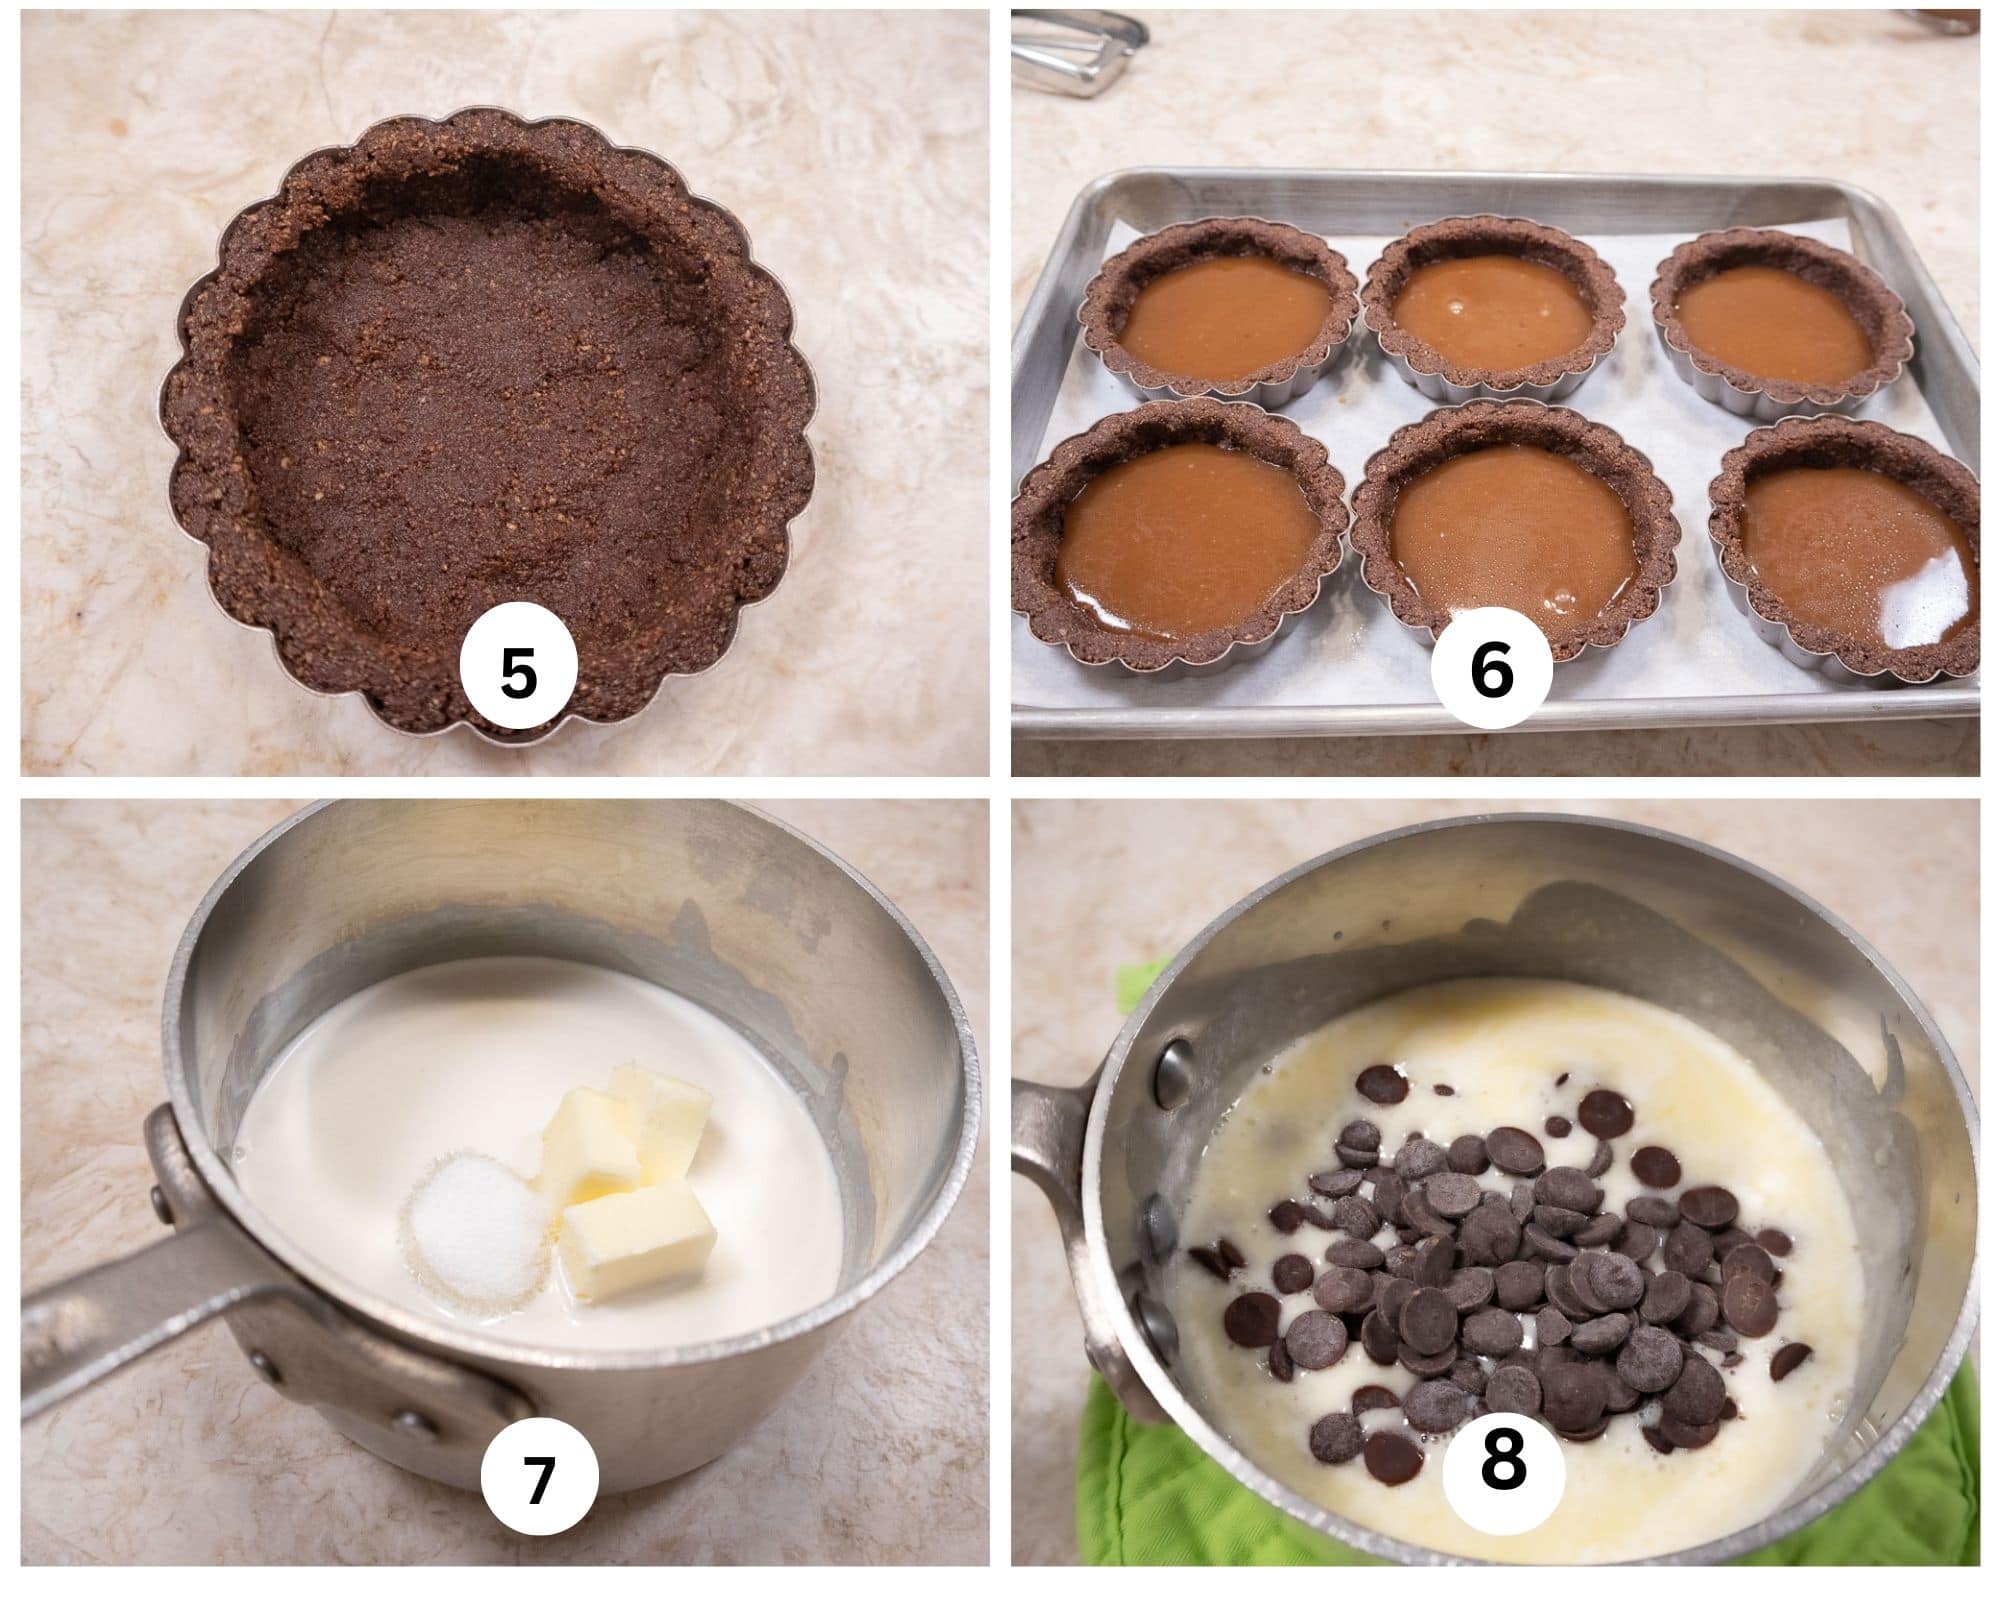 This collage shows the bottom of the crust in the pan, the pans filled with caramel, the liquid ingredients for the caramel in a saucepan followed by the chocolate and vanilla.